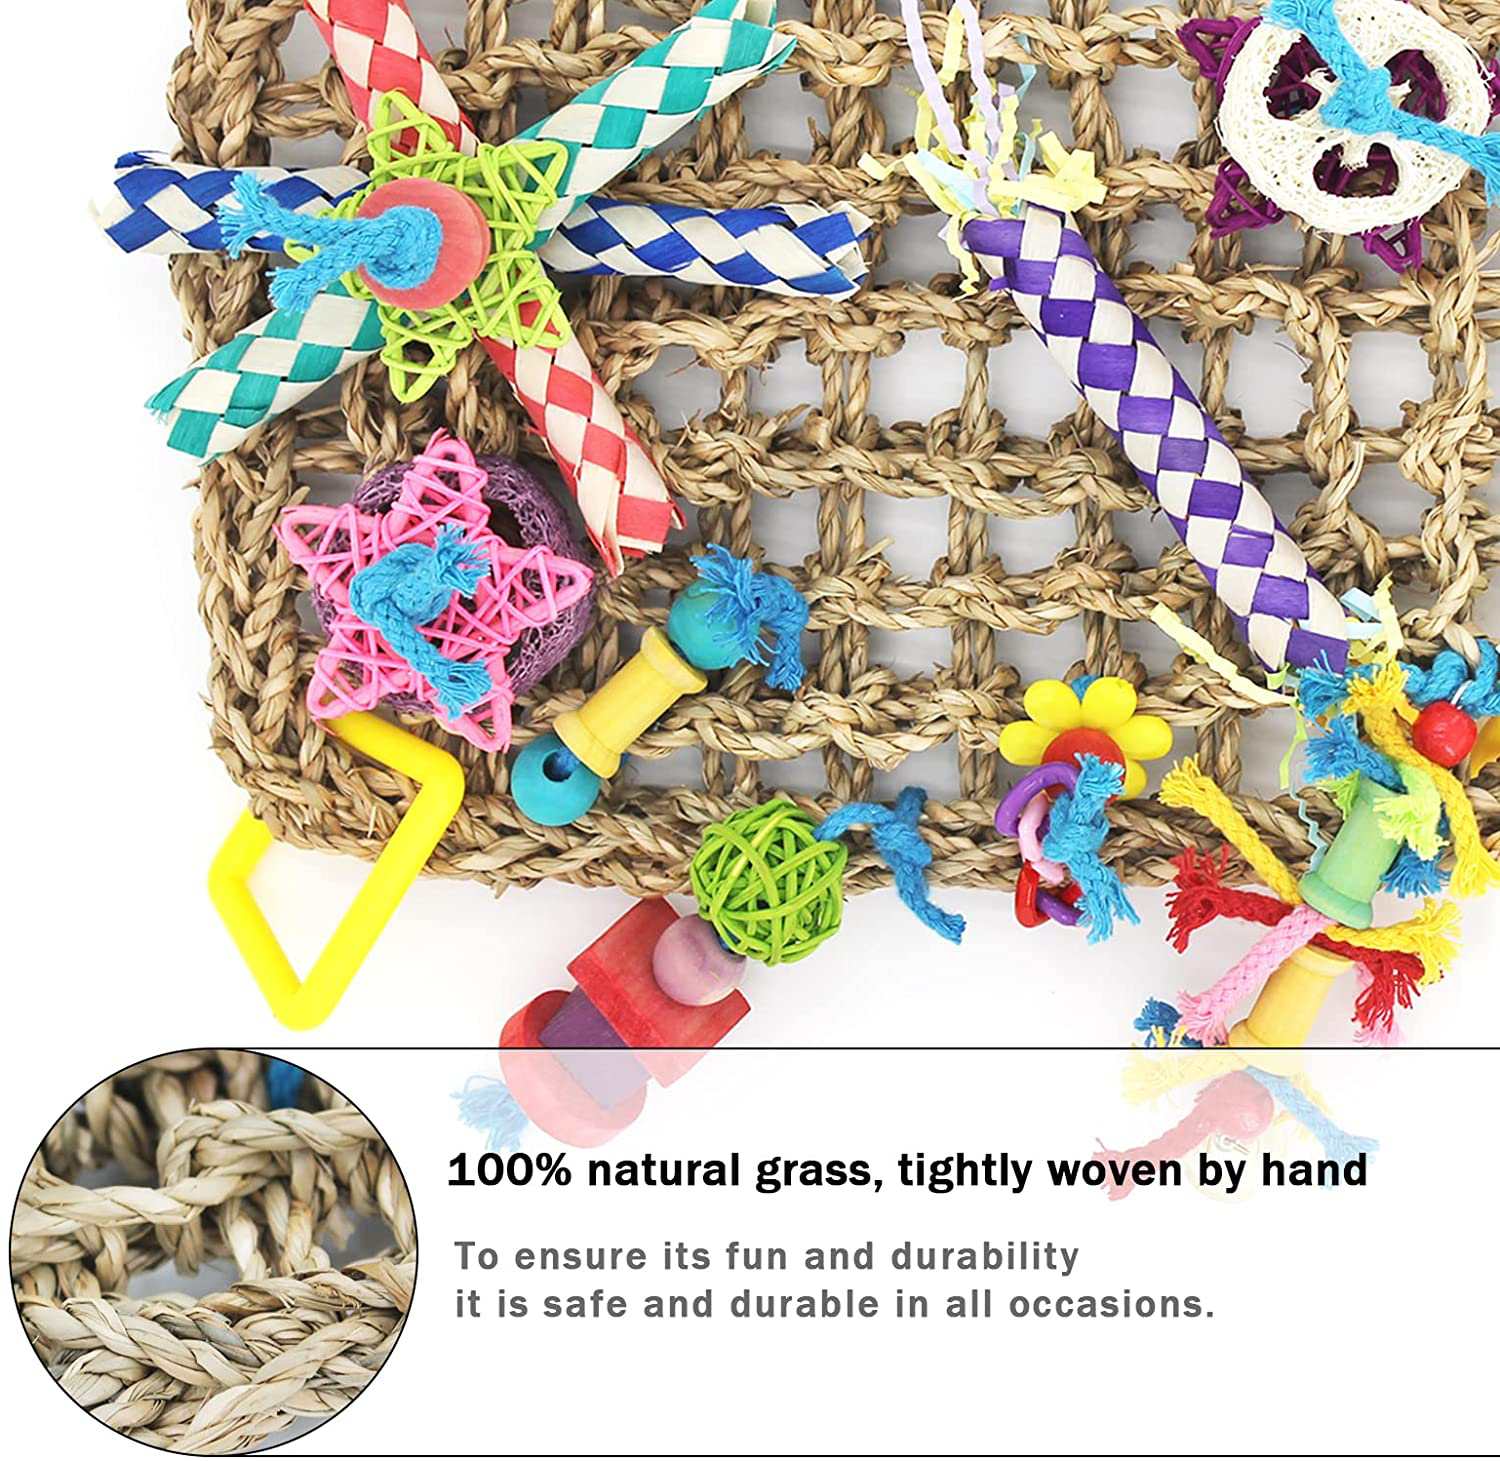 MHHOL Bird Parakeet Toys, Bird Foraging Wall Toy, Bird Perches Swing, Edible Seagrass Woven Climbing Hammock Mat with Chewing Toys, Bird Shredder Toys, for Parrots, Conures, Cockatiels, Budgies